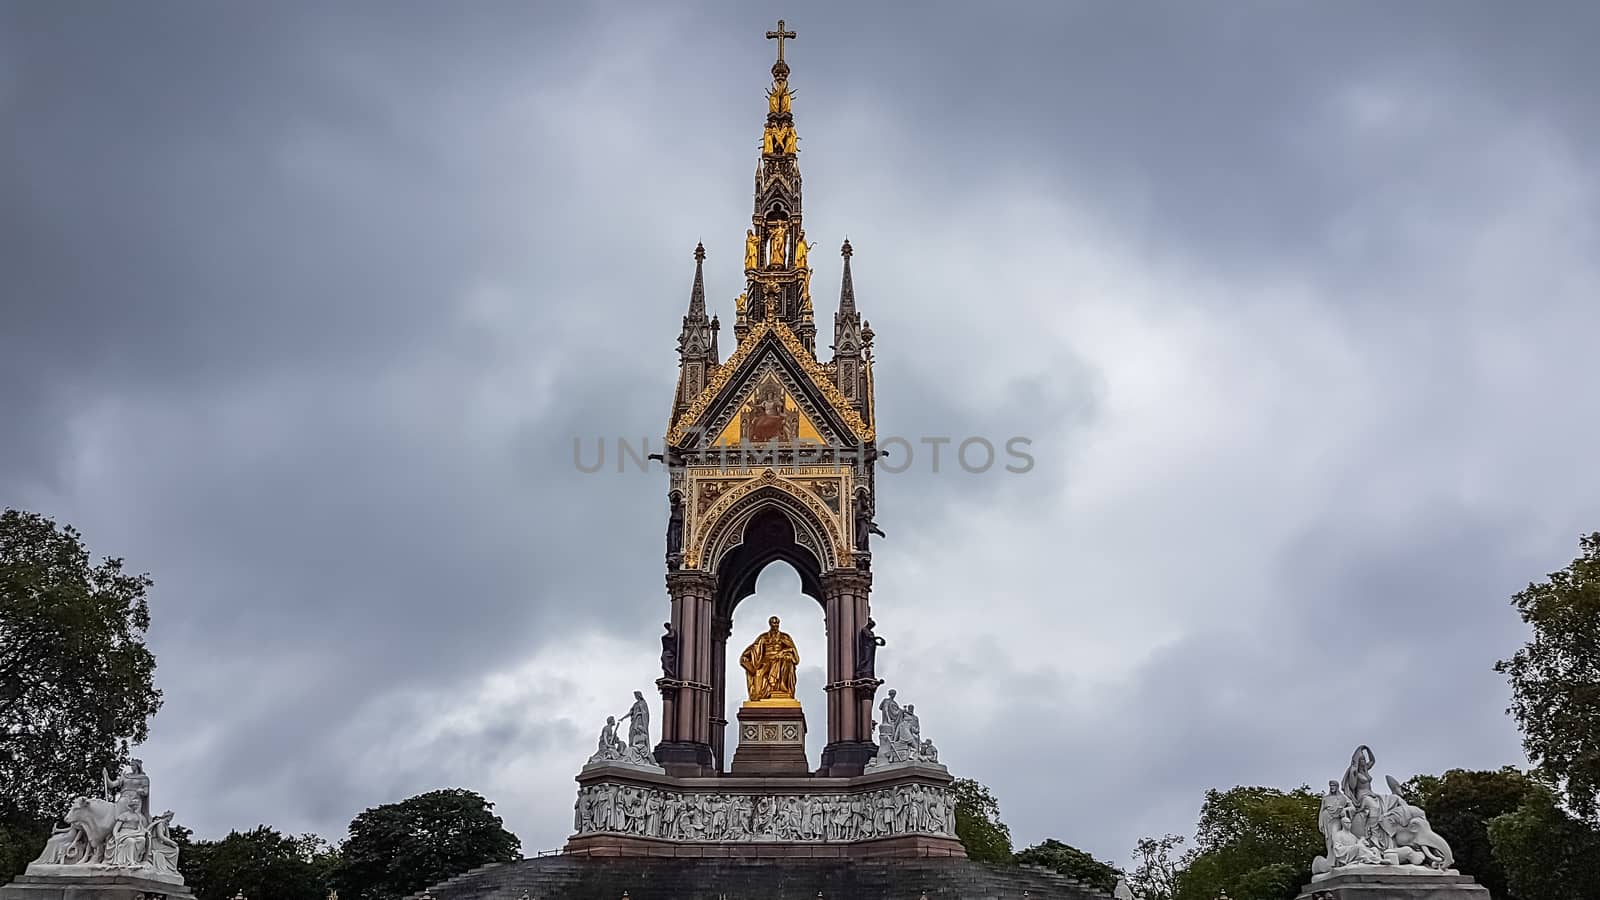 London, UK - July 8, 2020: The Prince Albert memorial in Hyde park. Dark cloudy sky as a background.